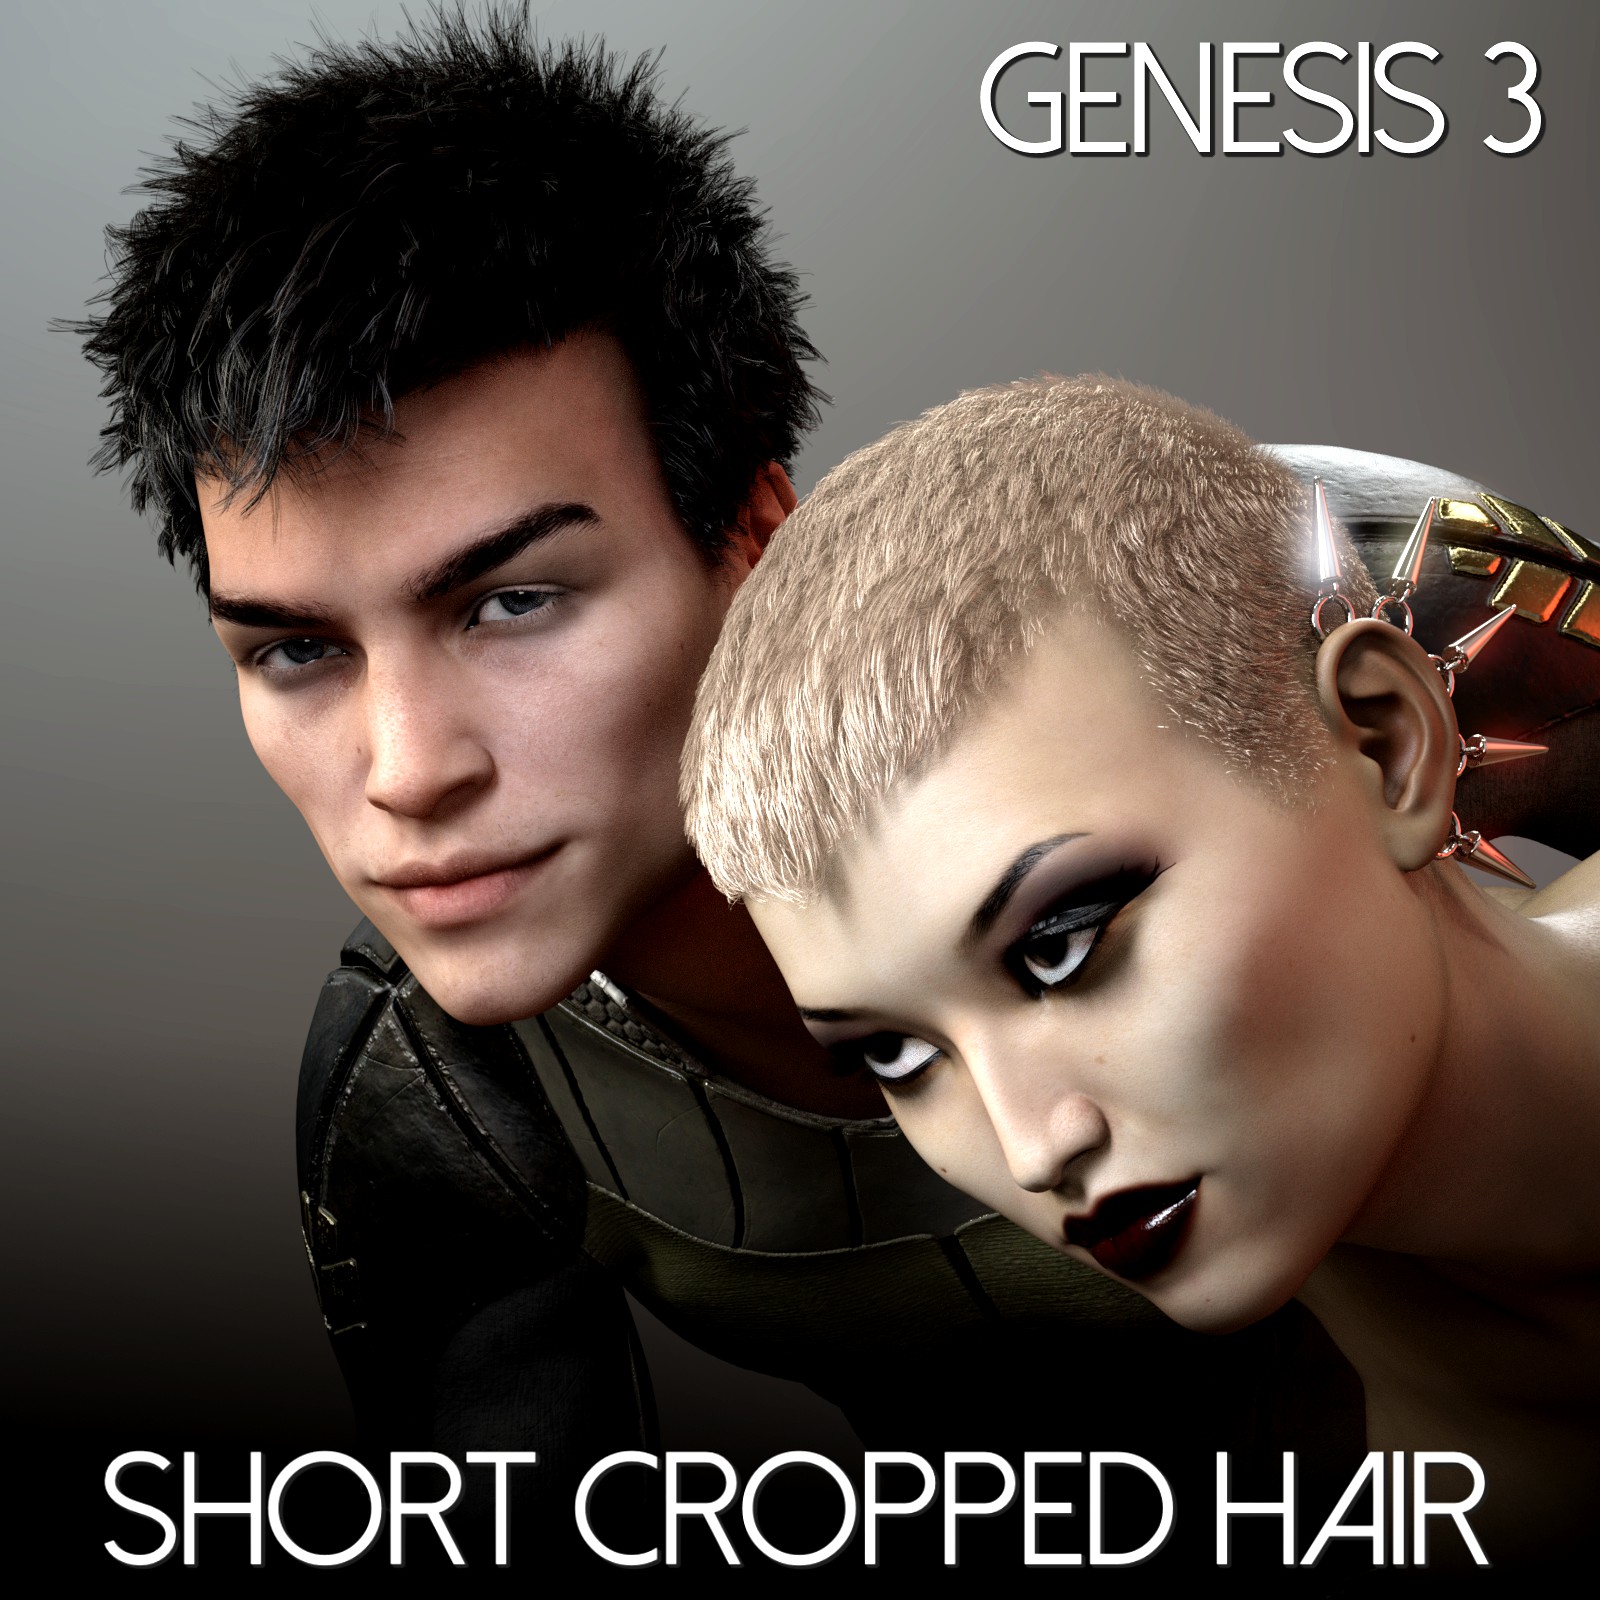 Short Cropped Hair for Genesis 3 Male and Females